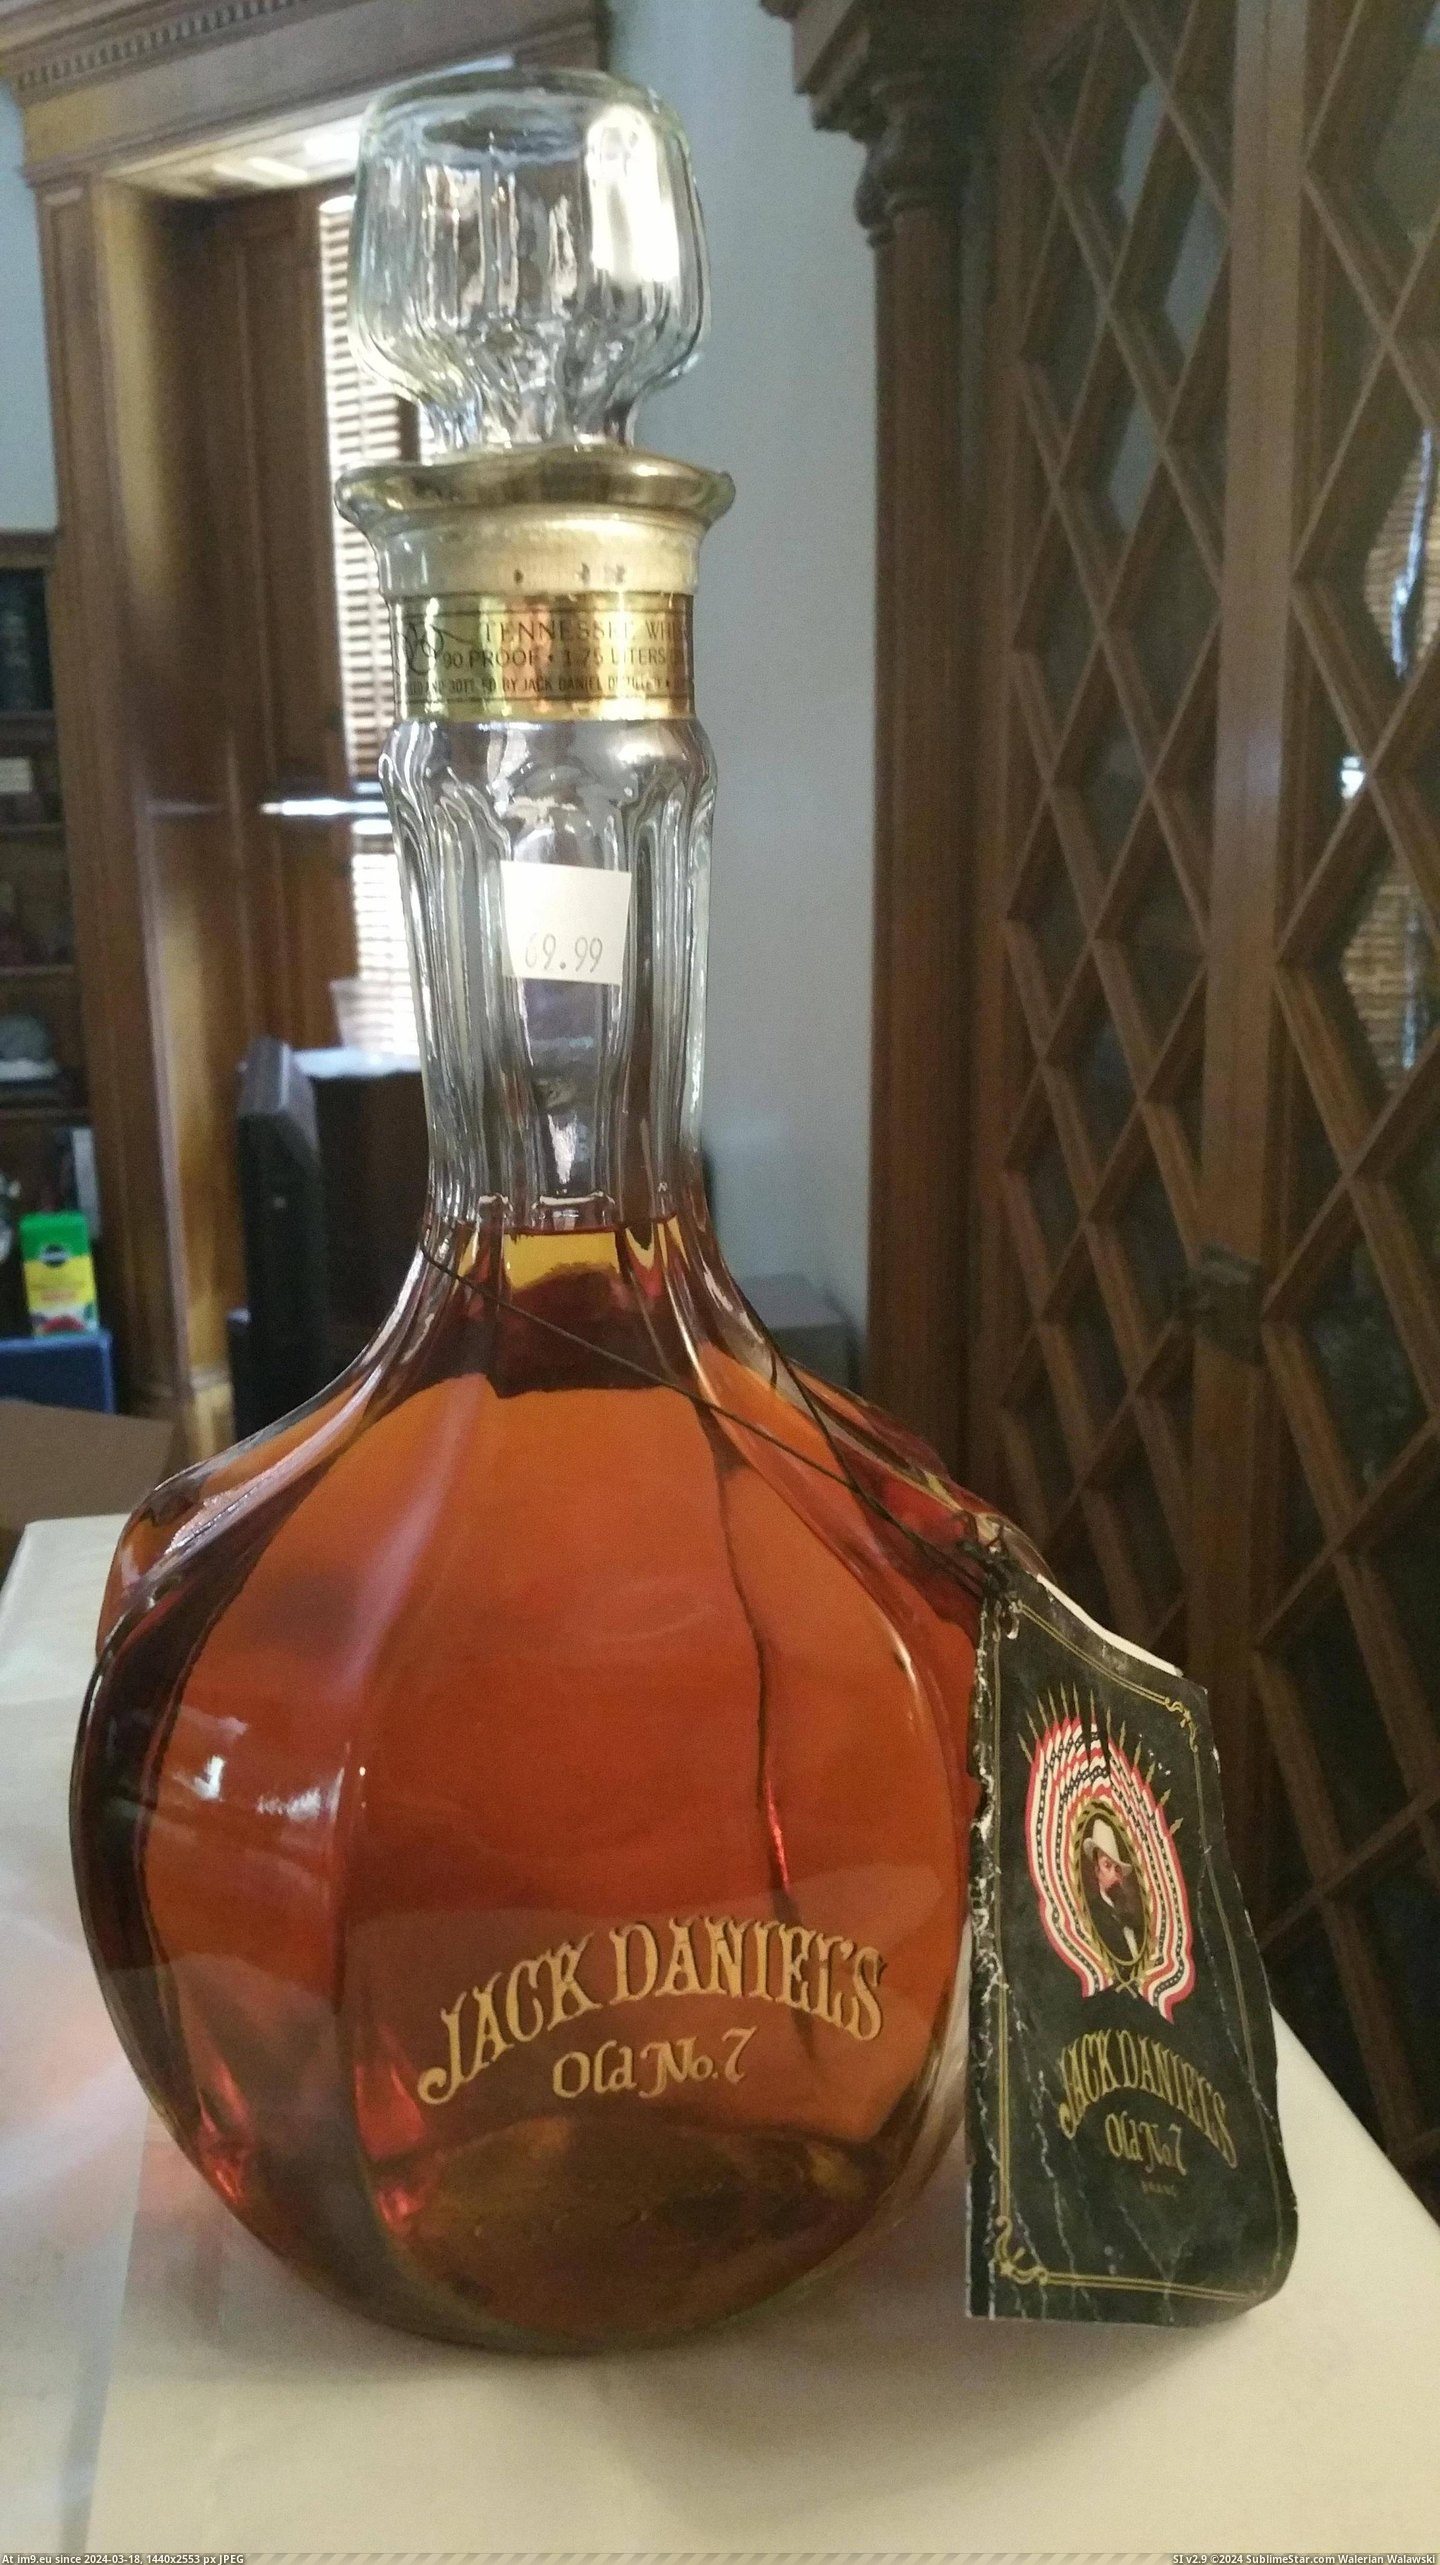 #Wife #Store #Office #Owner #Liquor #Passed #Stuck #Price [Pics] So the liquor store owner passed, his wife found this stashed back in the office, put a price on it($69.99), and stuck it Pic. (Obraz z album My r/PICS favs))